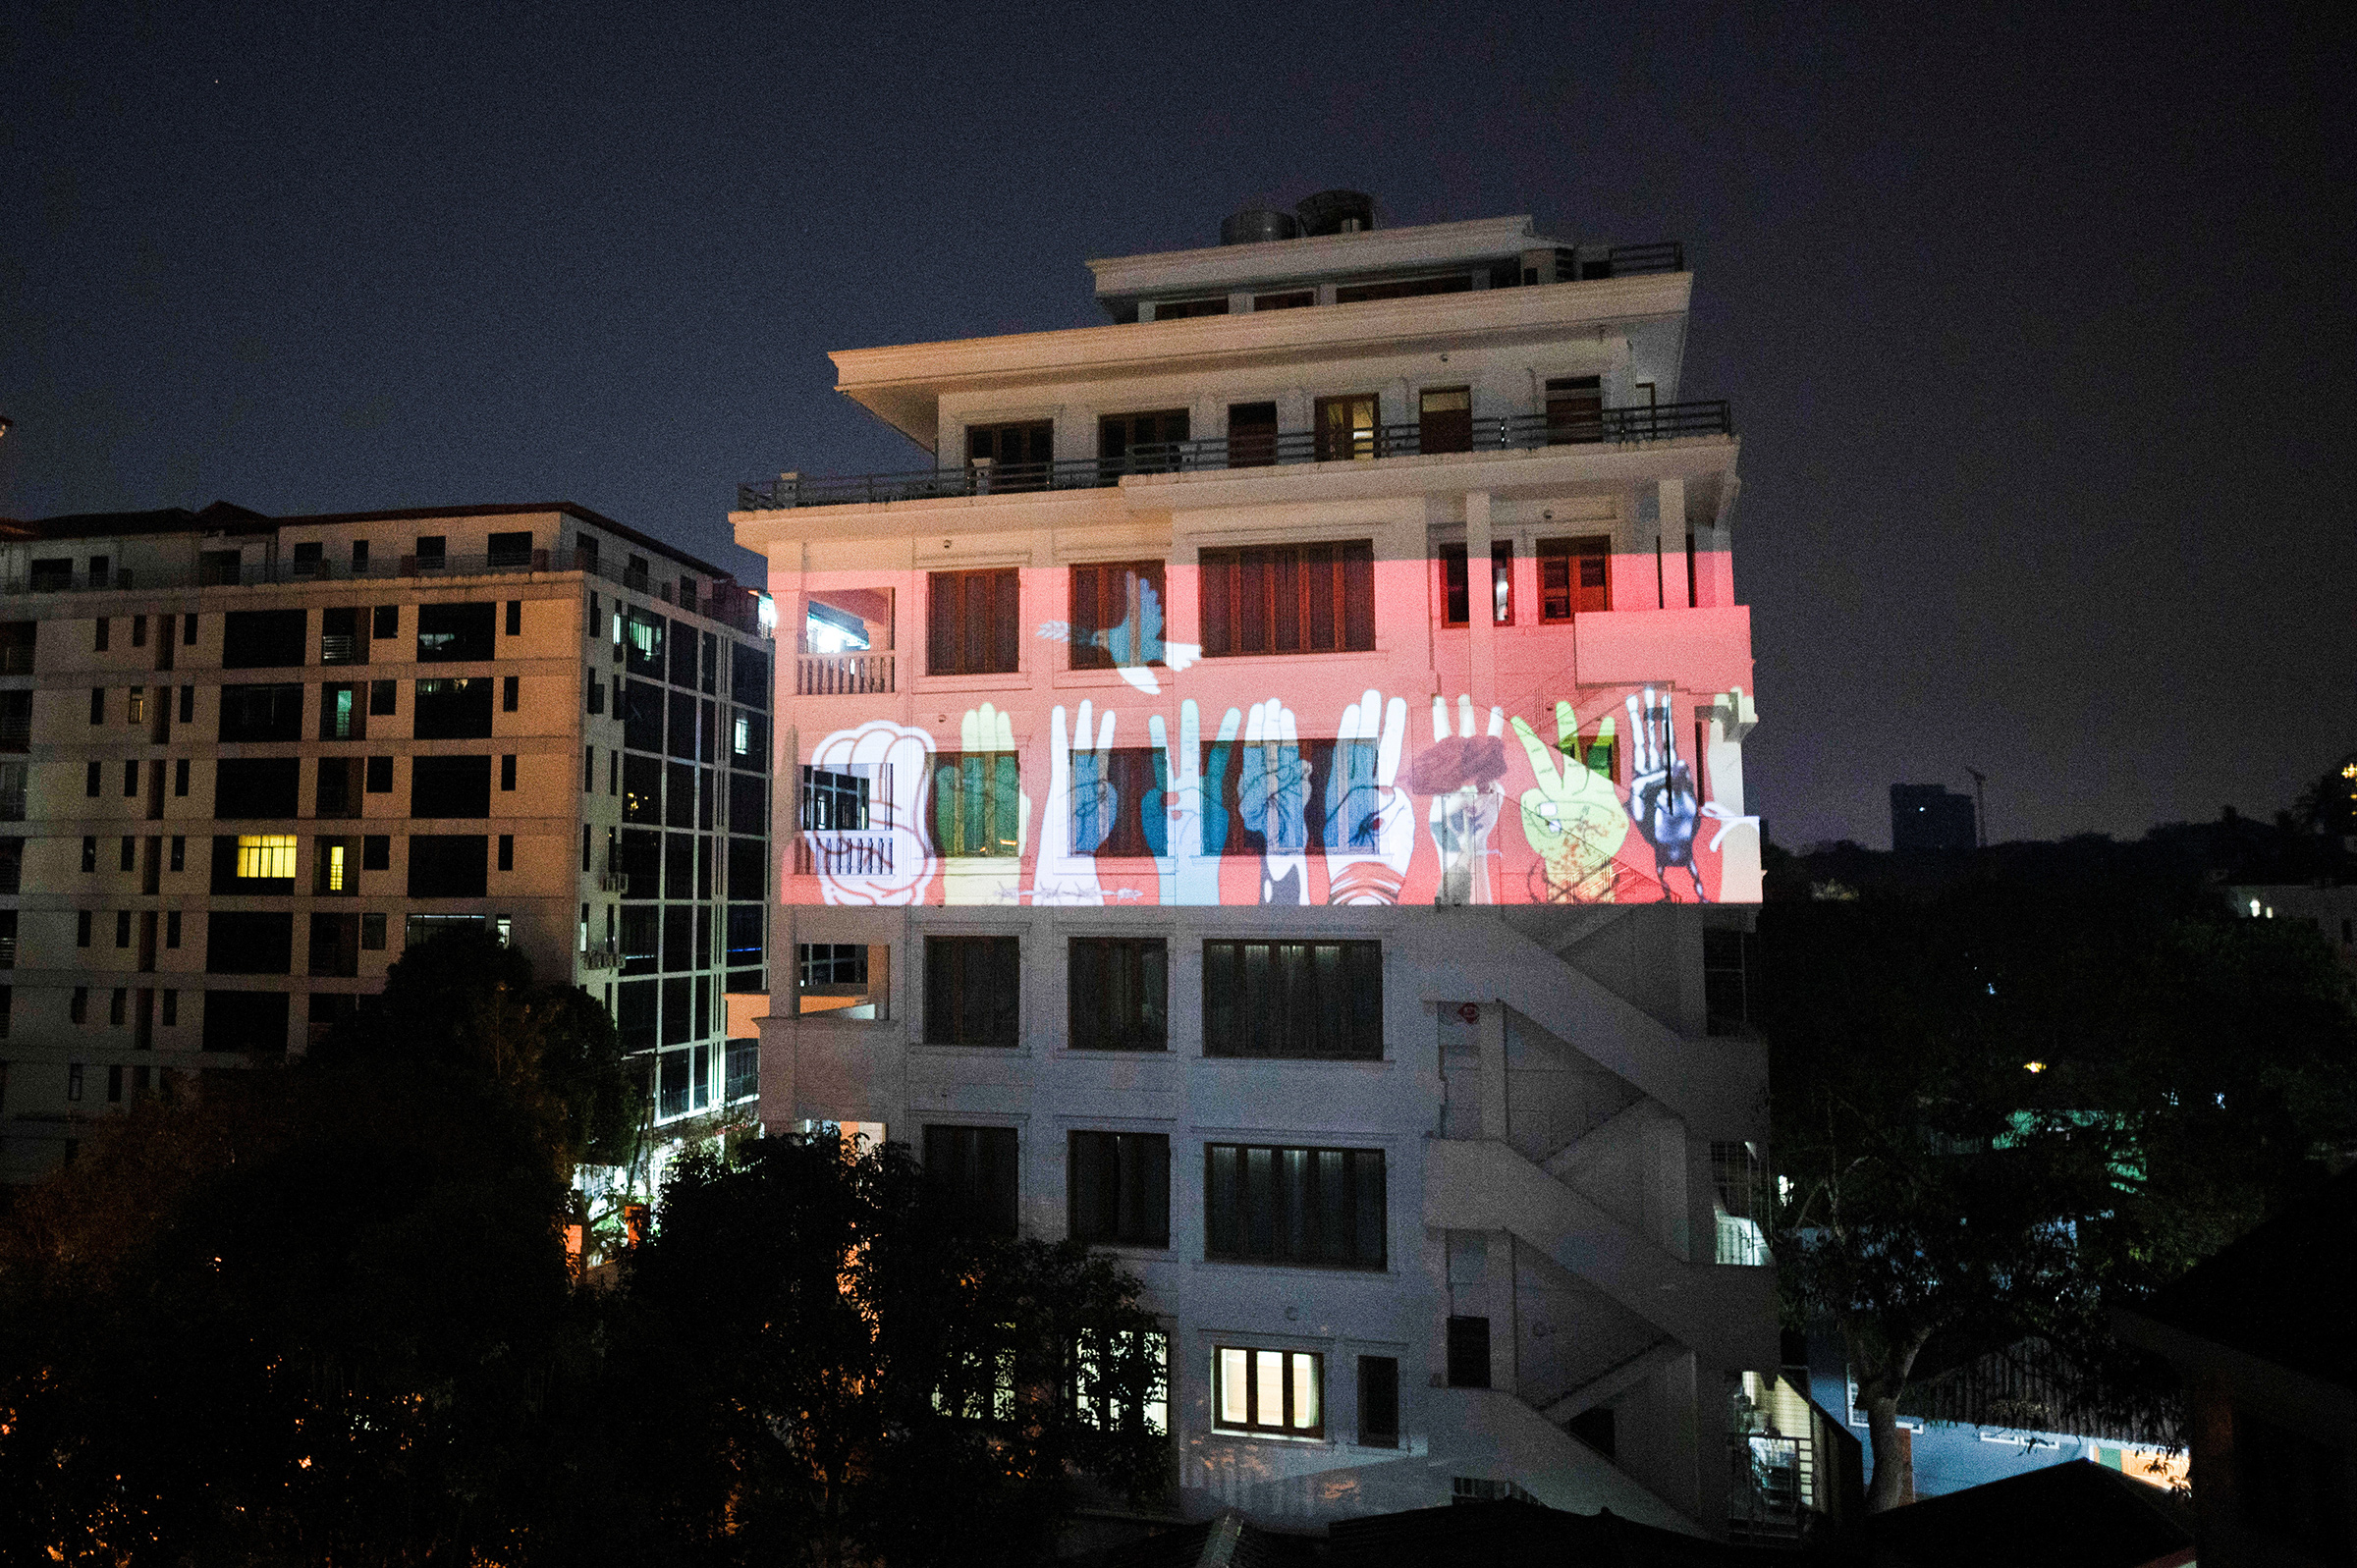 An image of three-finger salute is projected on a building during a night protest against the military coup and to demand the release of elected leader Aung San Suu Kyi, in Yangon, Myanmar, Feb. 9 (Reuters)